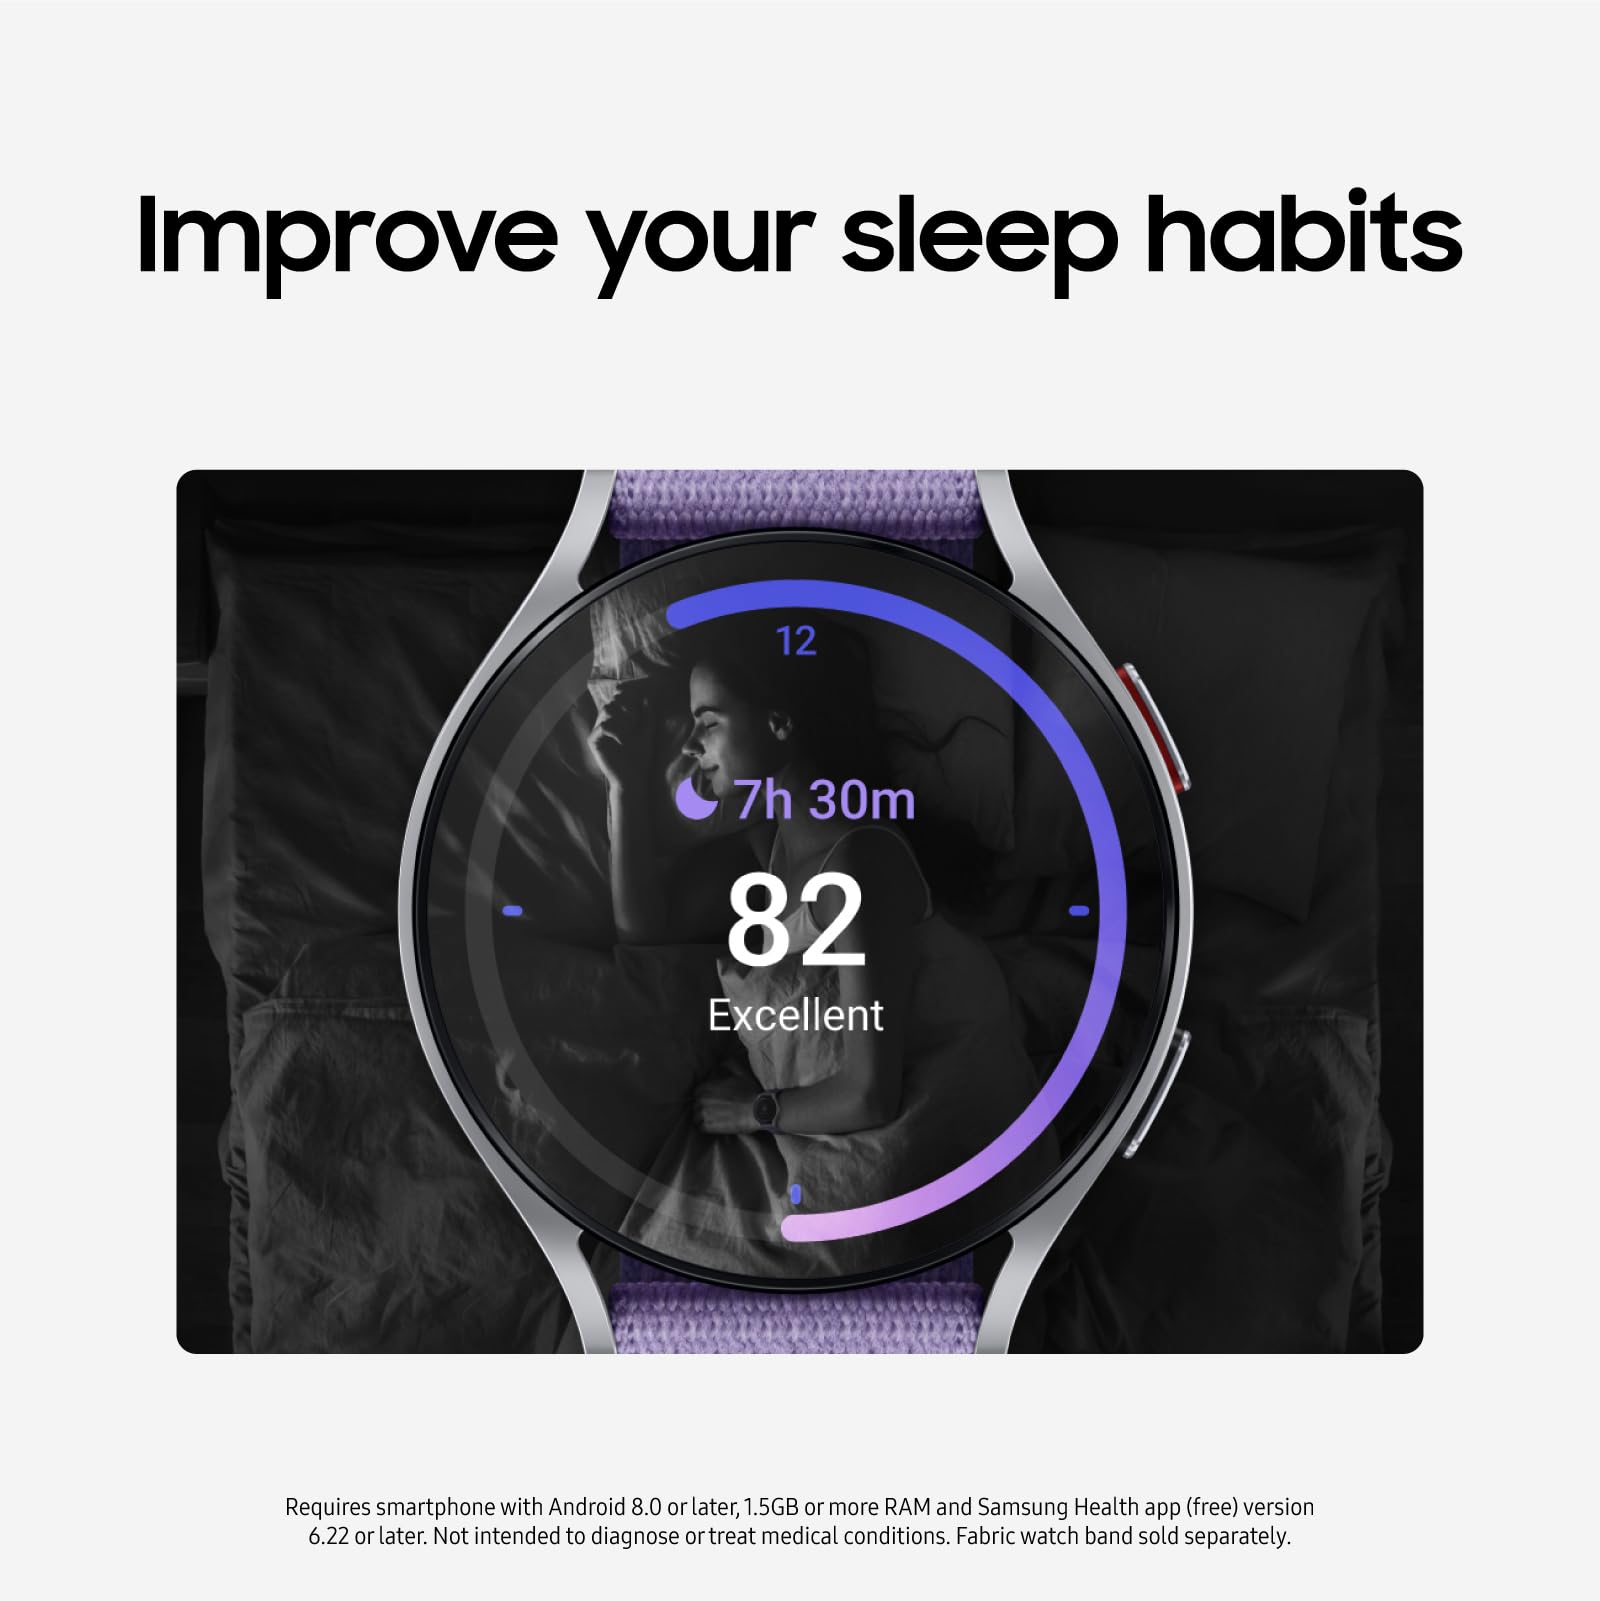 SAMSUNG Galaxy Watch 6 Bespoke Edition 40mm Exclusive Bluetooth Smartwatch, Health, Fitness, Sleep, Heart Rate Tracker, Improved Battery, Sapphire Crystal Glass, US Version, Graphite Sport Band, Mint